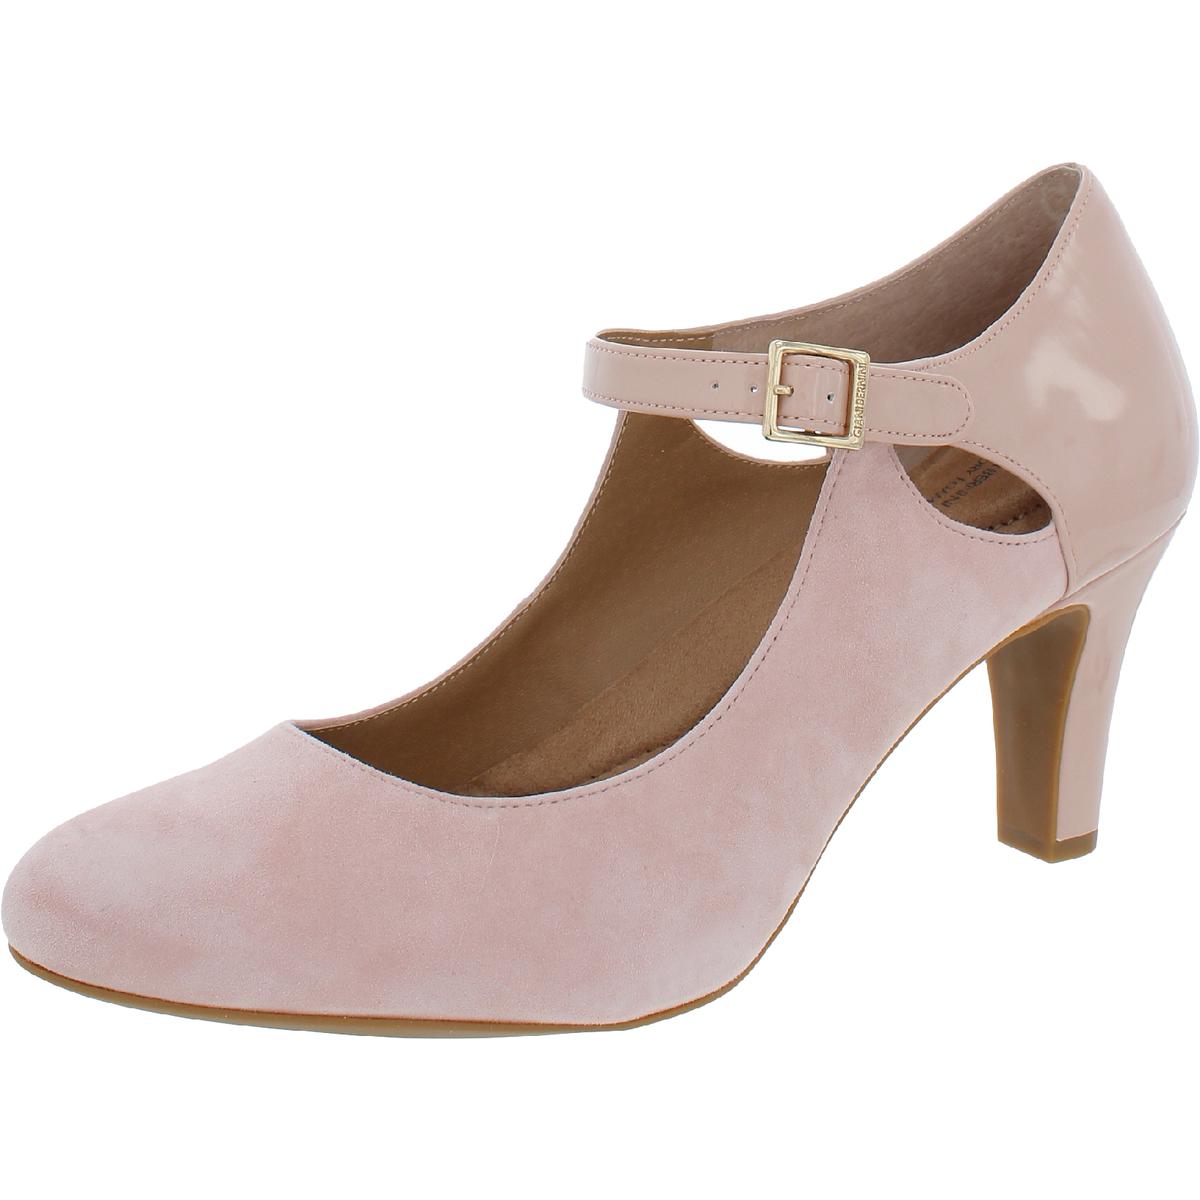 Selected Color is Blush Suede Patent